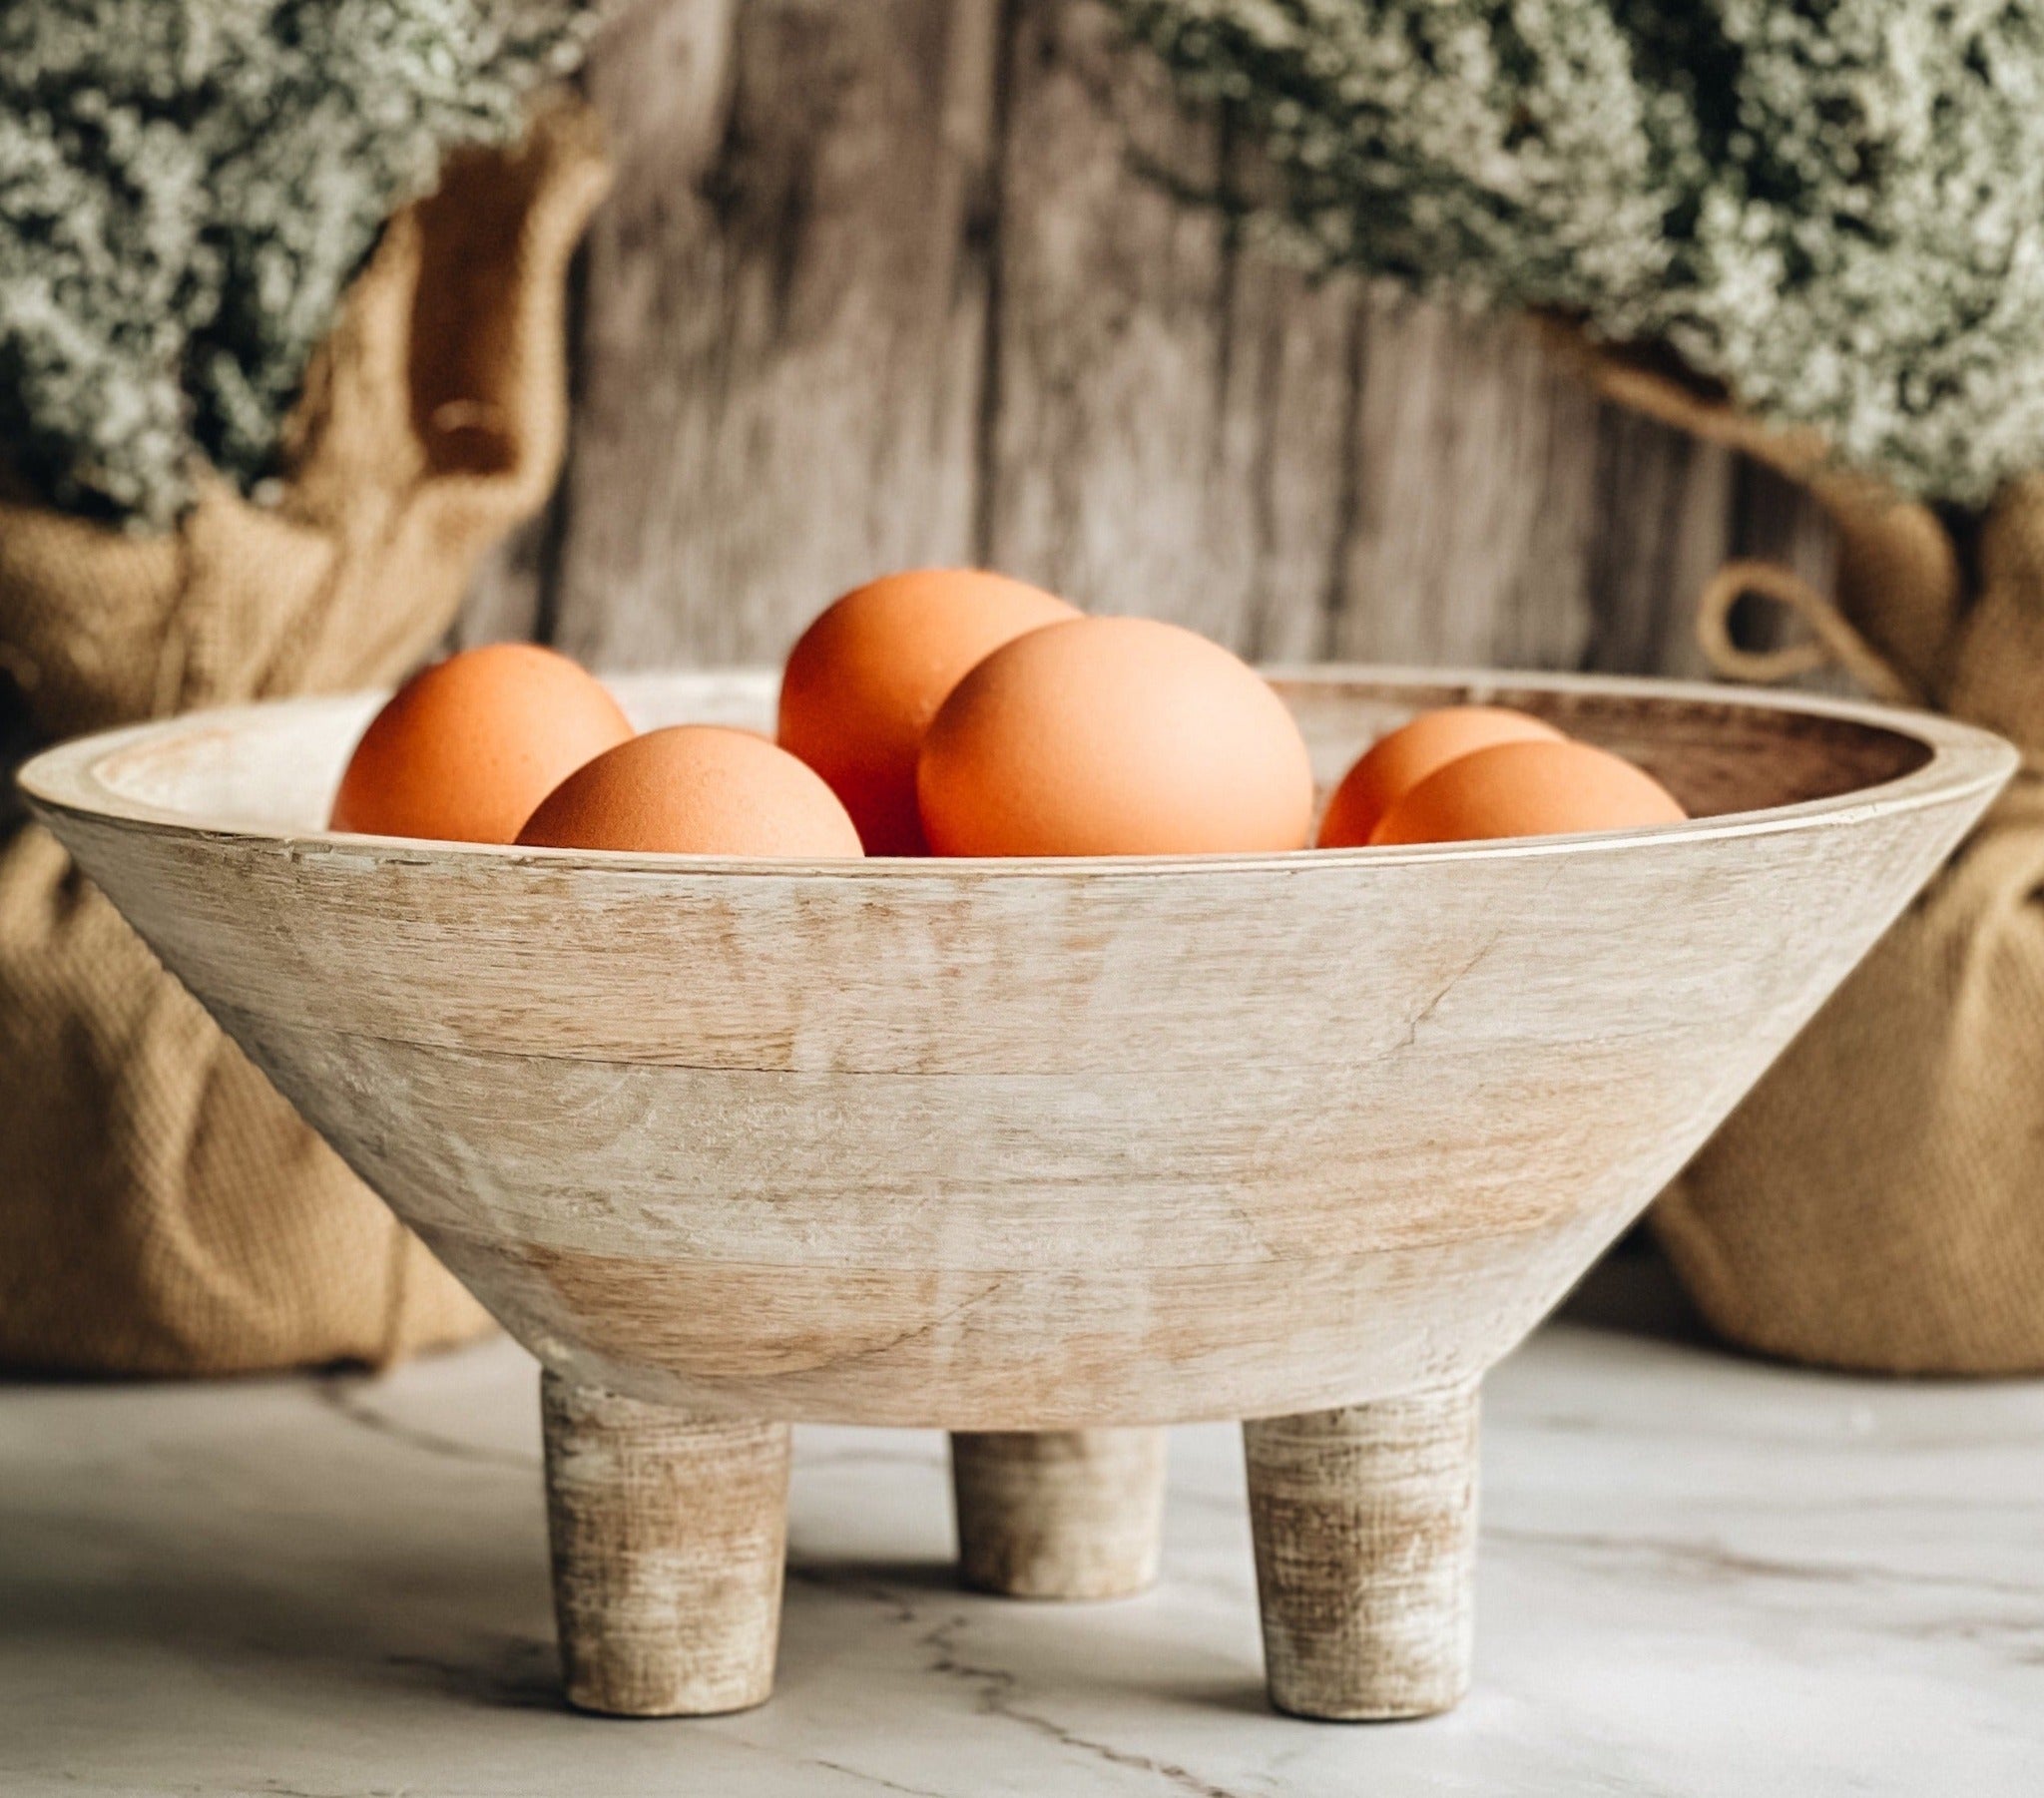 Wooden Footed Bowl